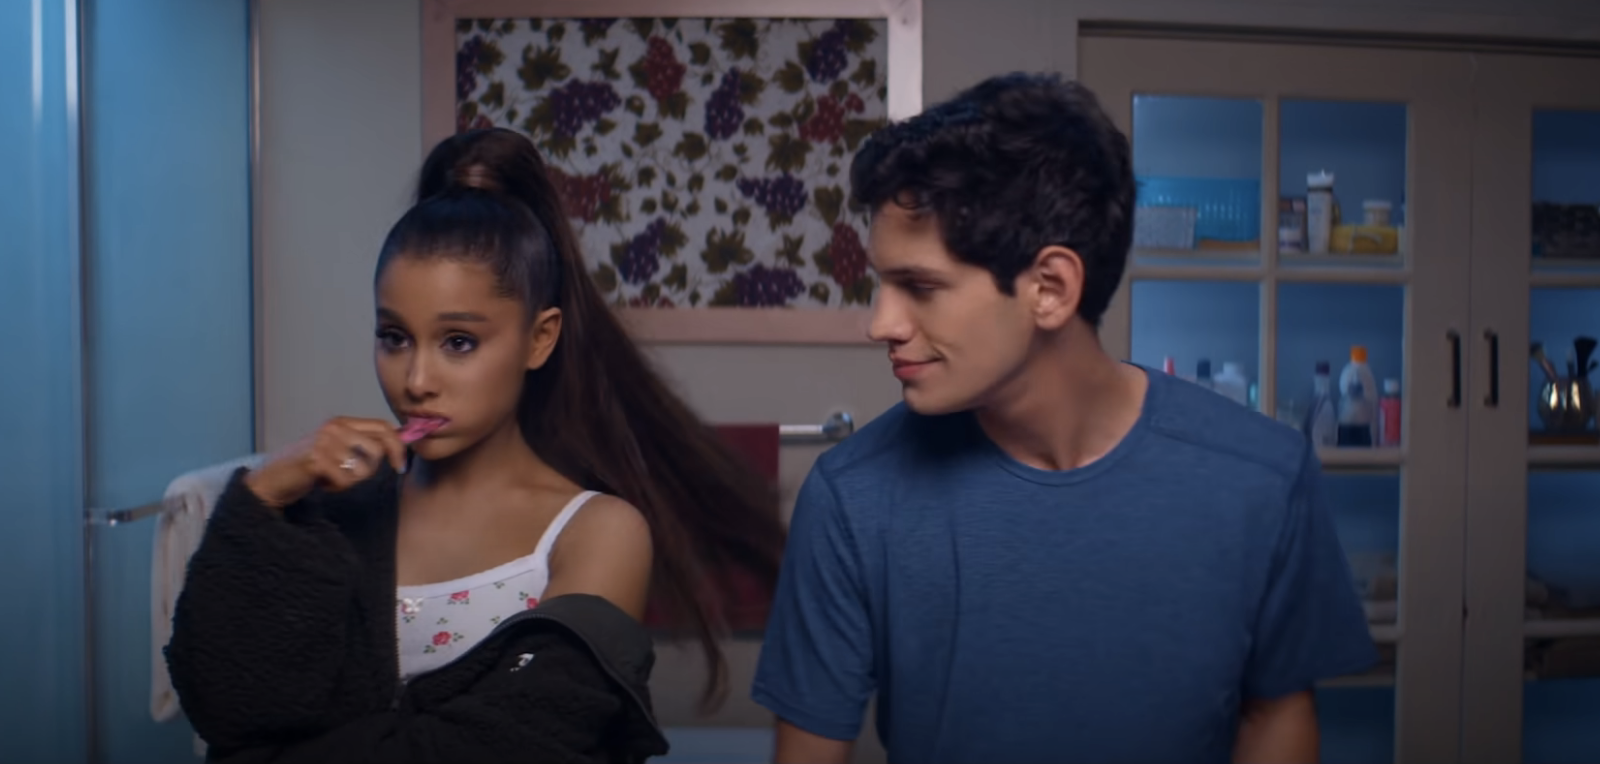 Ariana Grande and Matt Bennett recreating the &quot;Bring It On&quot; toothbrushing scene in the &quot;Thank U Next&quot; video